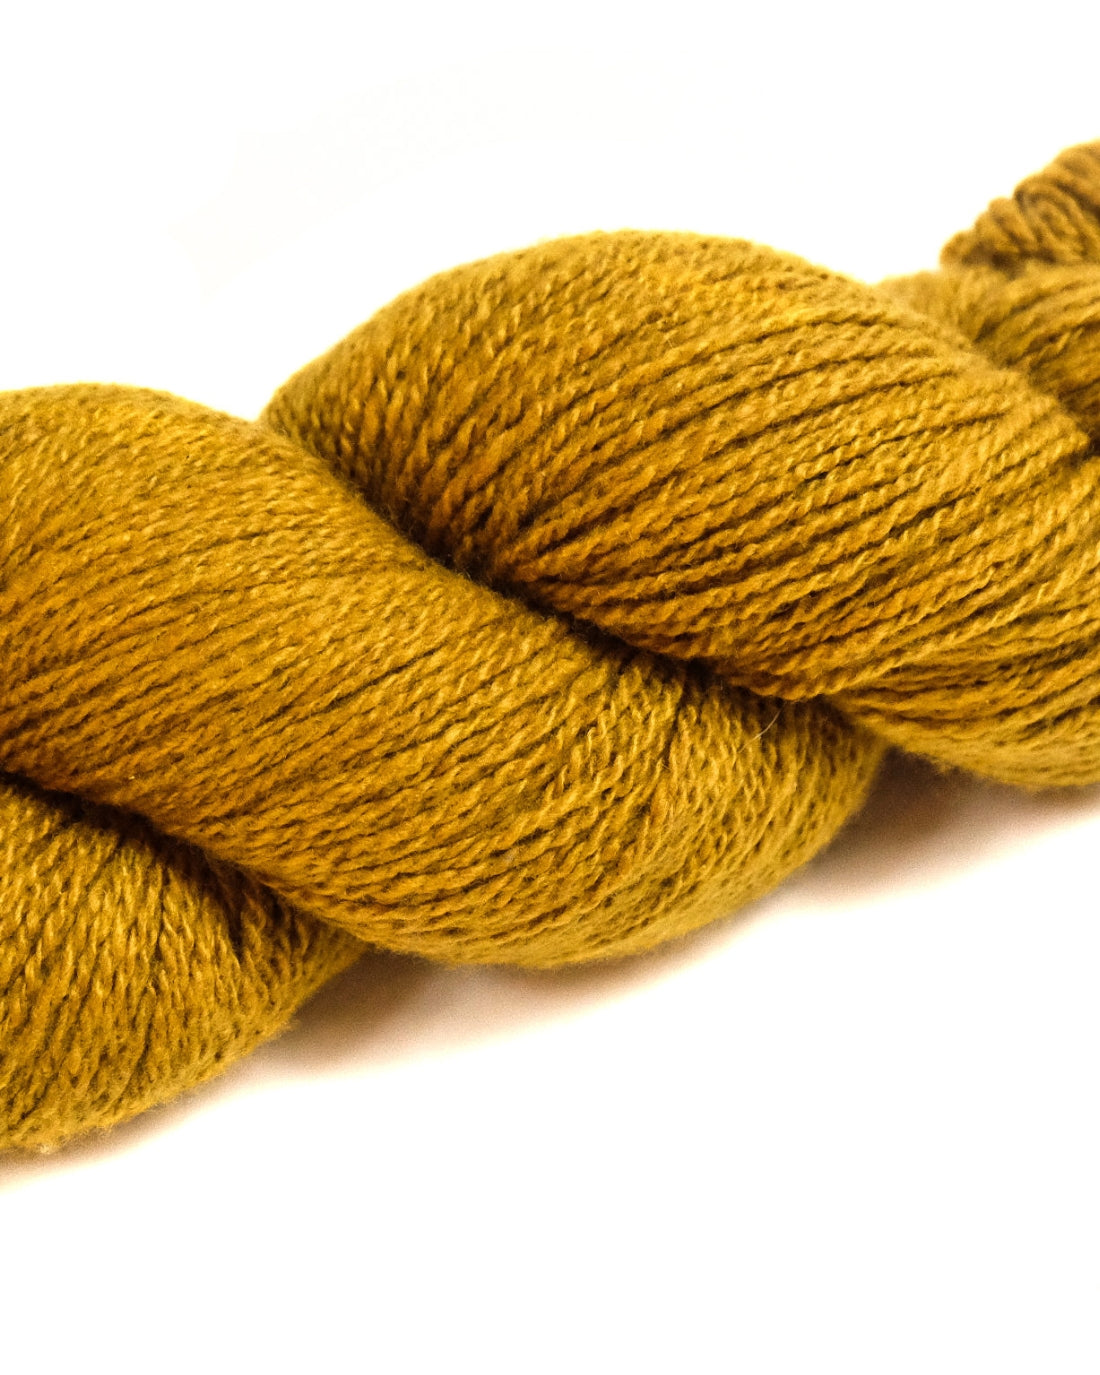 Sport Weight Cashmere Yarn by Cashmere People